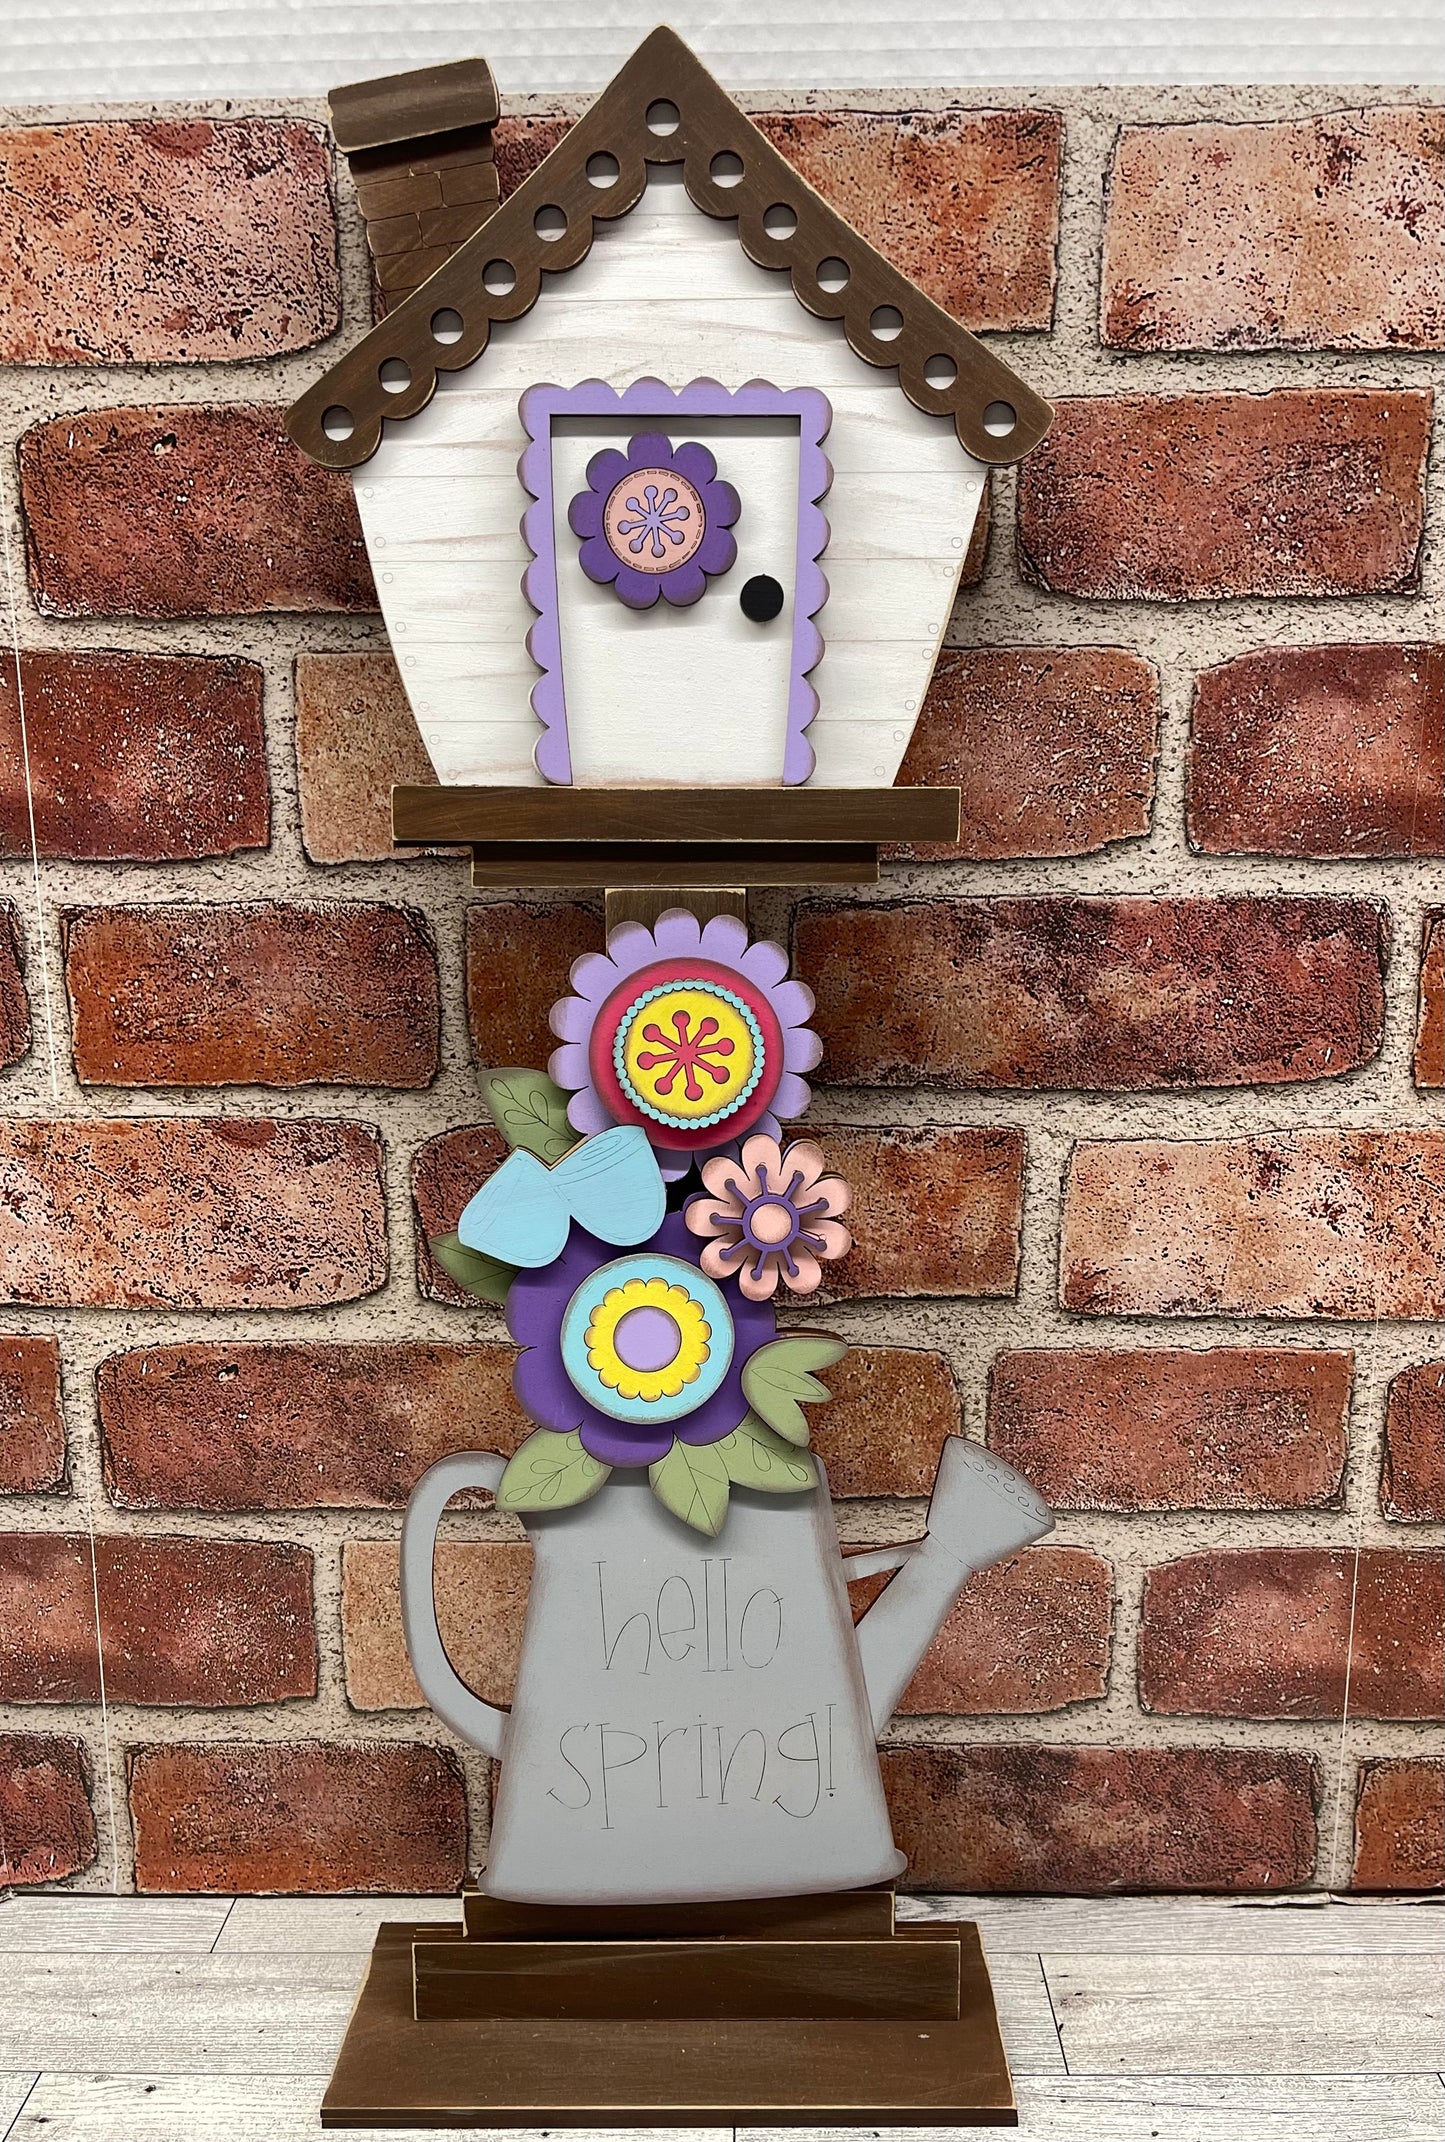 Hello Spring Watering Can Birdhouse changeable standing kit only - wood pieces, unpainted wood cutouts, ready for you to paint, sign backer is not included